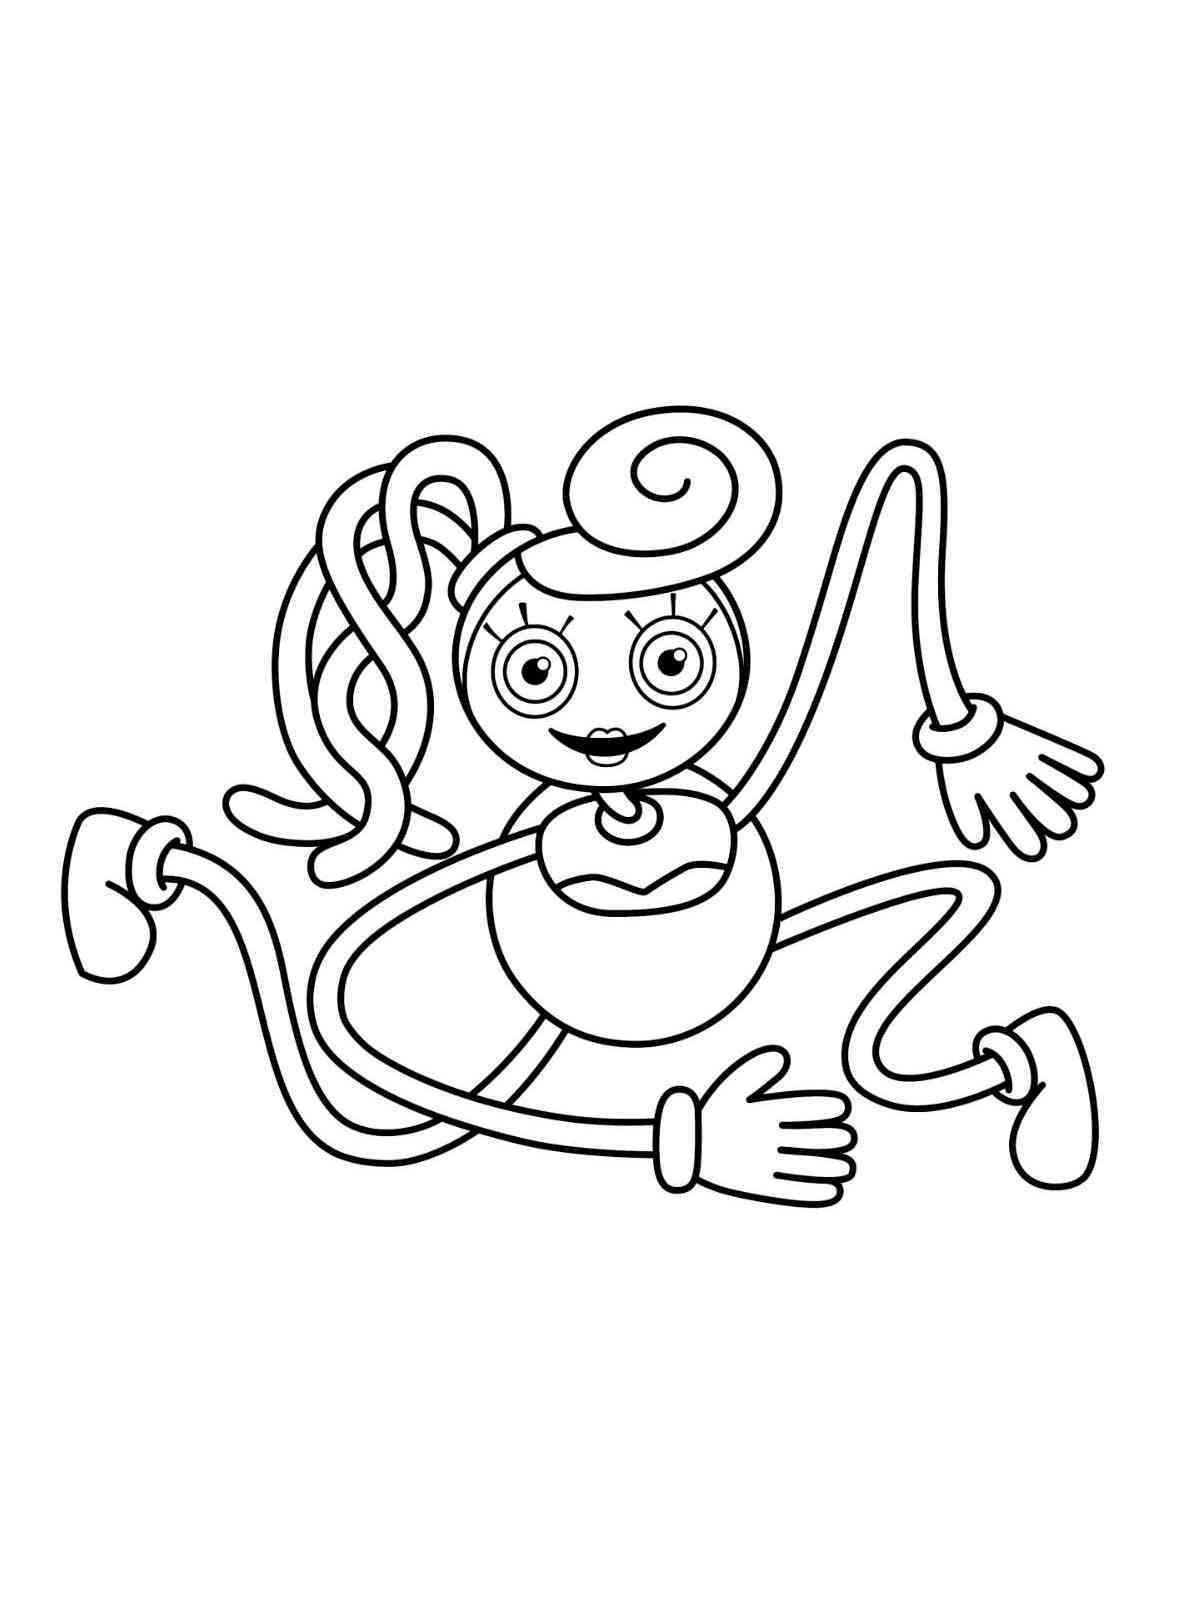 Free Printable Mommy Long Legs Coloring Pages for Adults and Kids